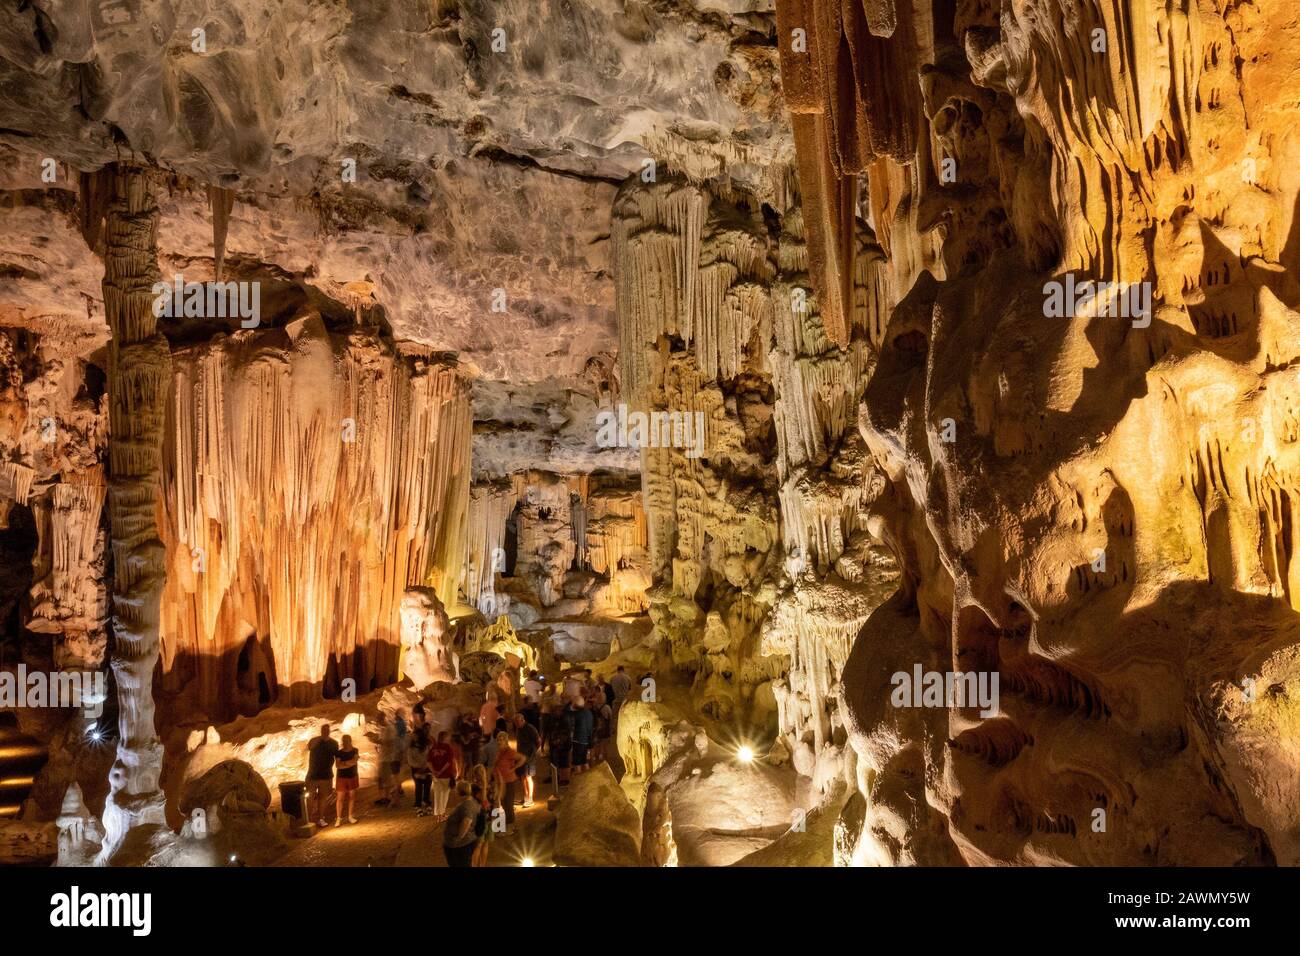 Group of tourists visiting the Cango Caves near Oudtshoorn, Western Cape Province, South Africa Stock Photo